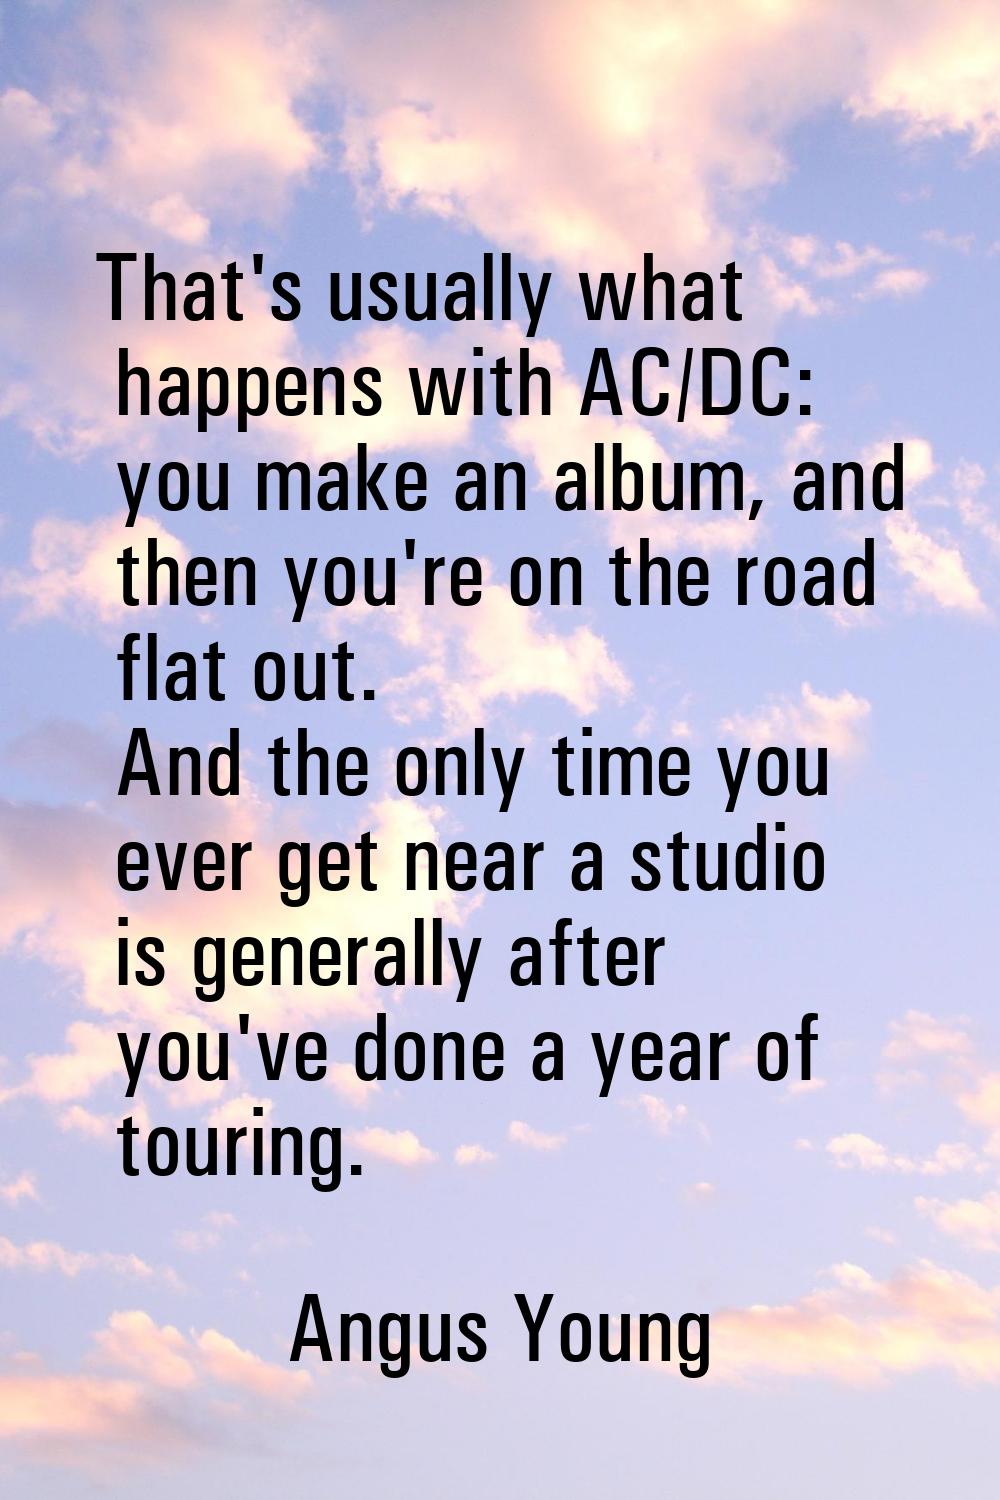 That's usually what happens with AC/DC: you make an album, and then you're on the road flat out. An